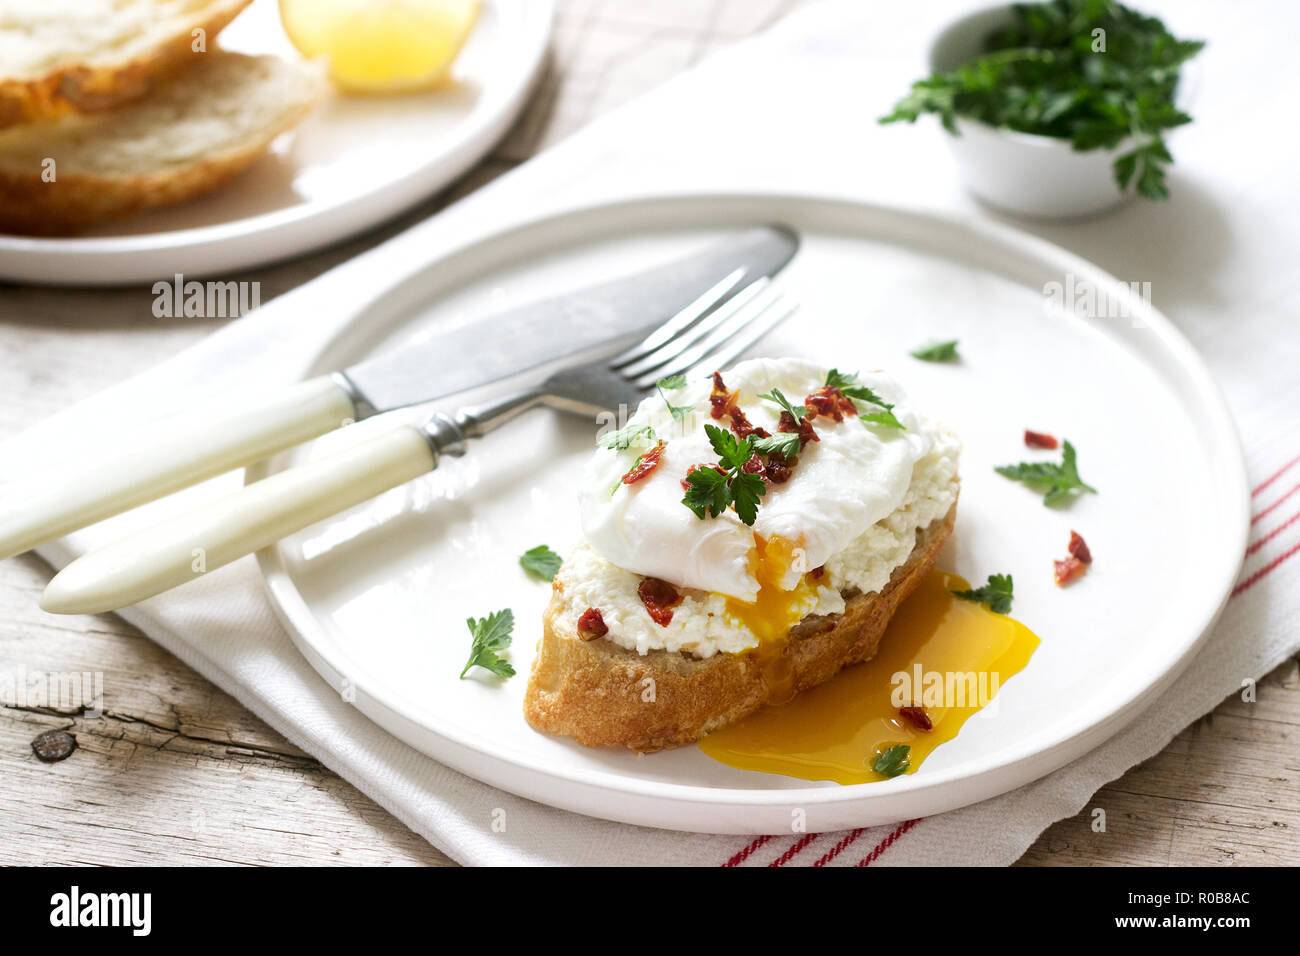 Crispy Baguette Toasts With Cottage Cheese Poached Egg And Dried